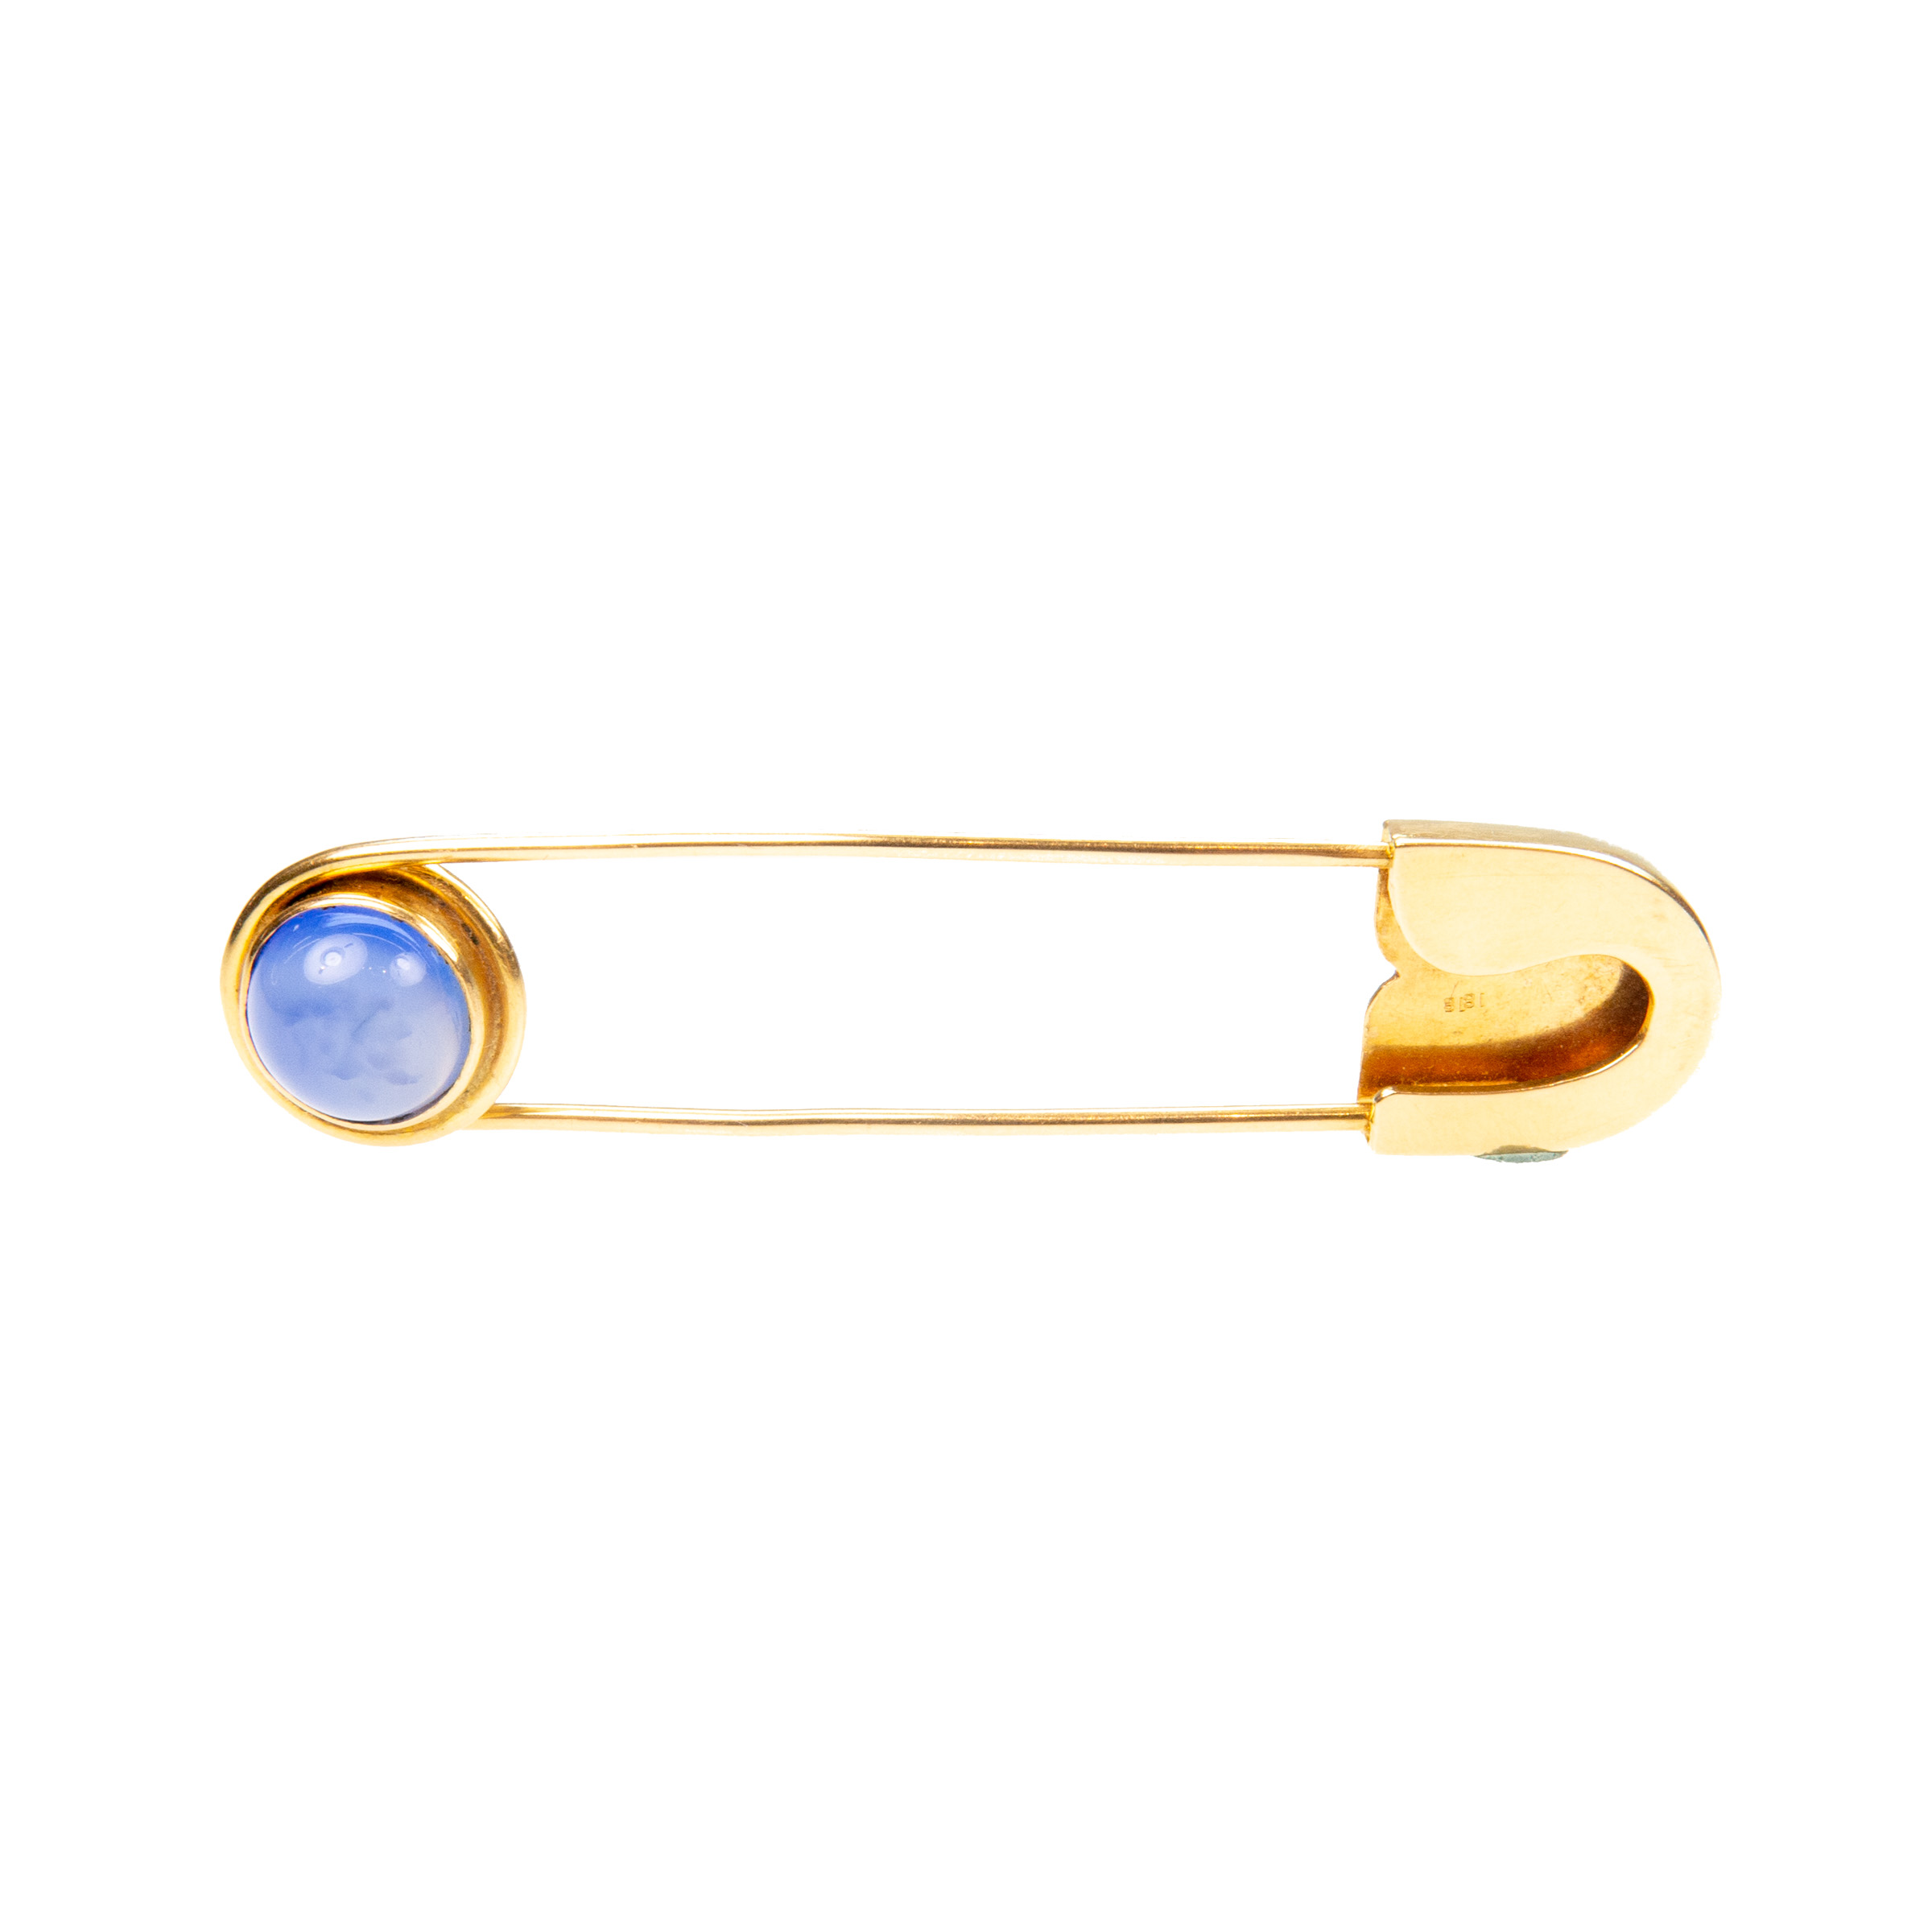 18k Yellow Gold Safety Pin Brooch